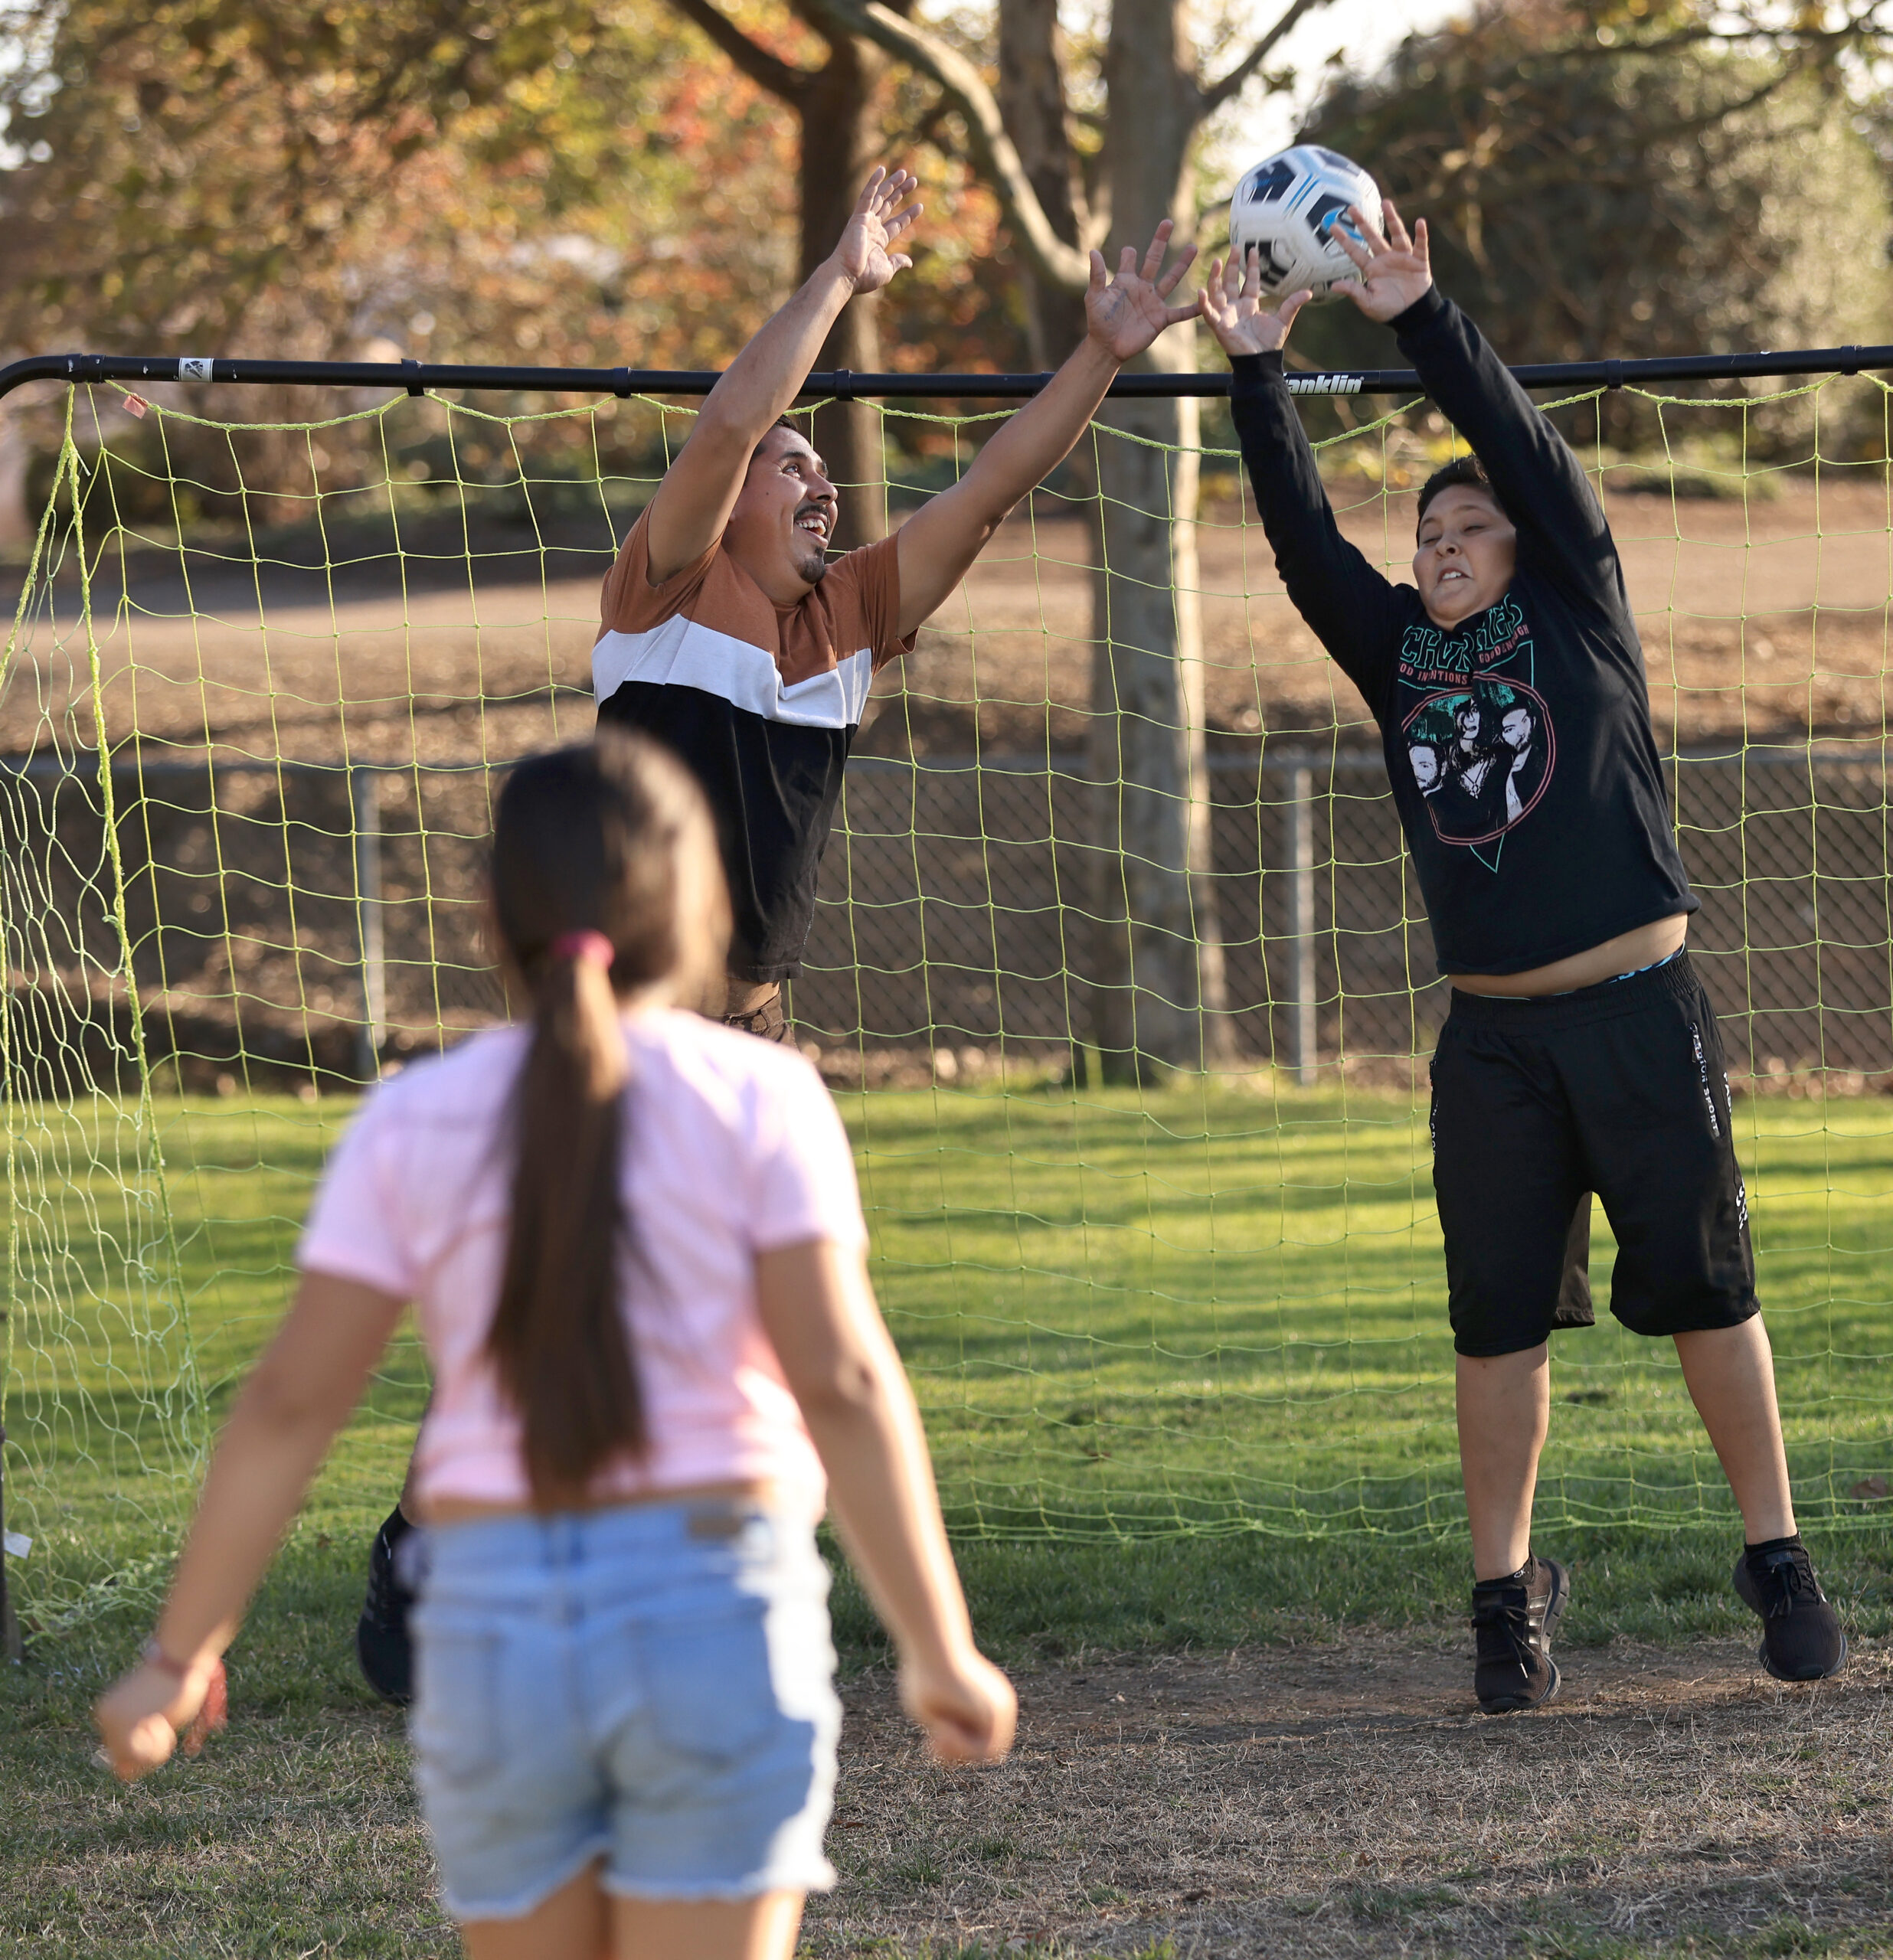 Adrian, 13, and his father Julio Pena play soccer with sister and daughter Angelique, 10, Wednesday, Nov. 16, 2022 in Healdsburg. The family was granted asylum, and drove through the border legally on Oct. 19 from Tepalcatepec, Michoacan in Mexico. . (Kent Porter / The Press Democrat) 2022